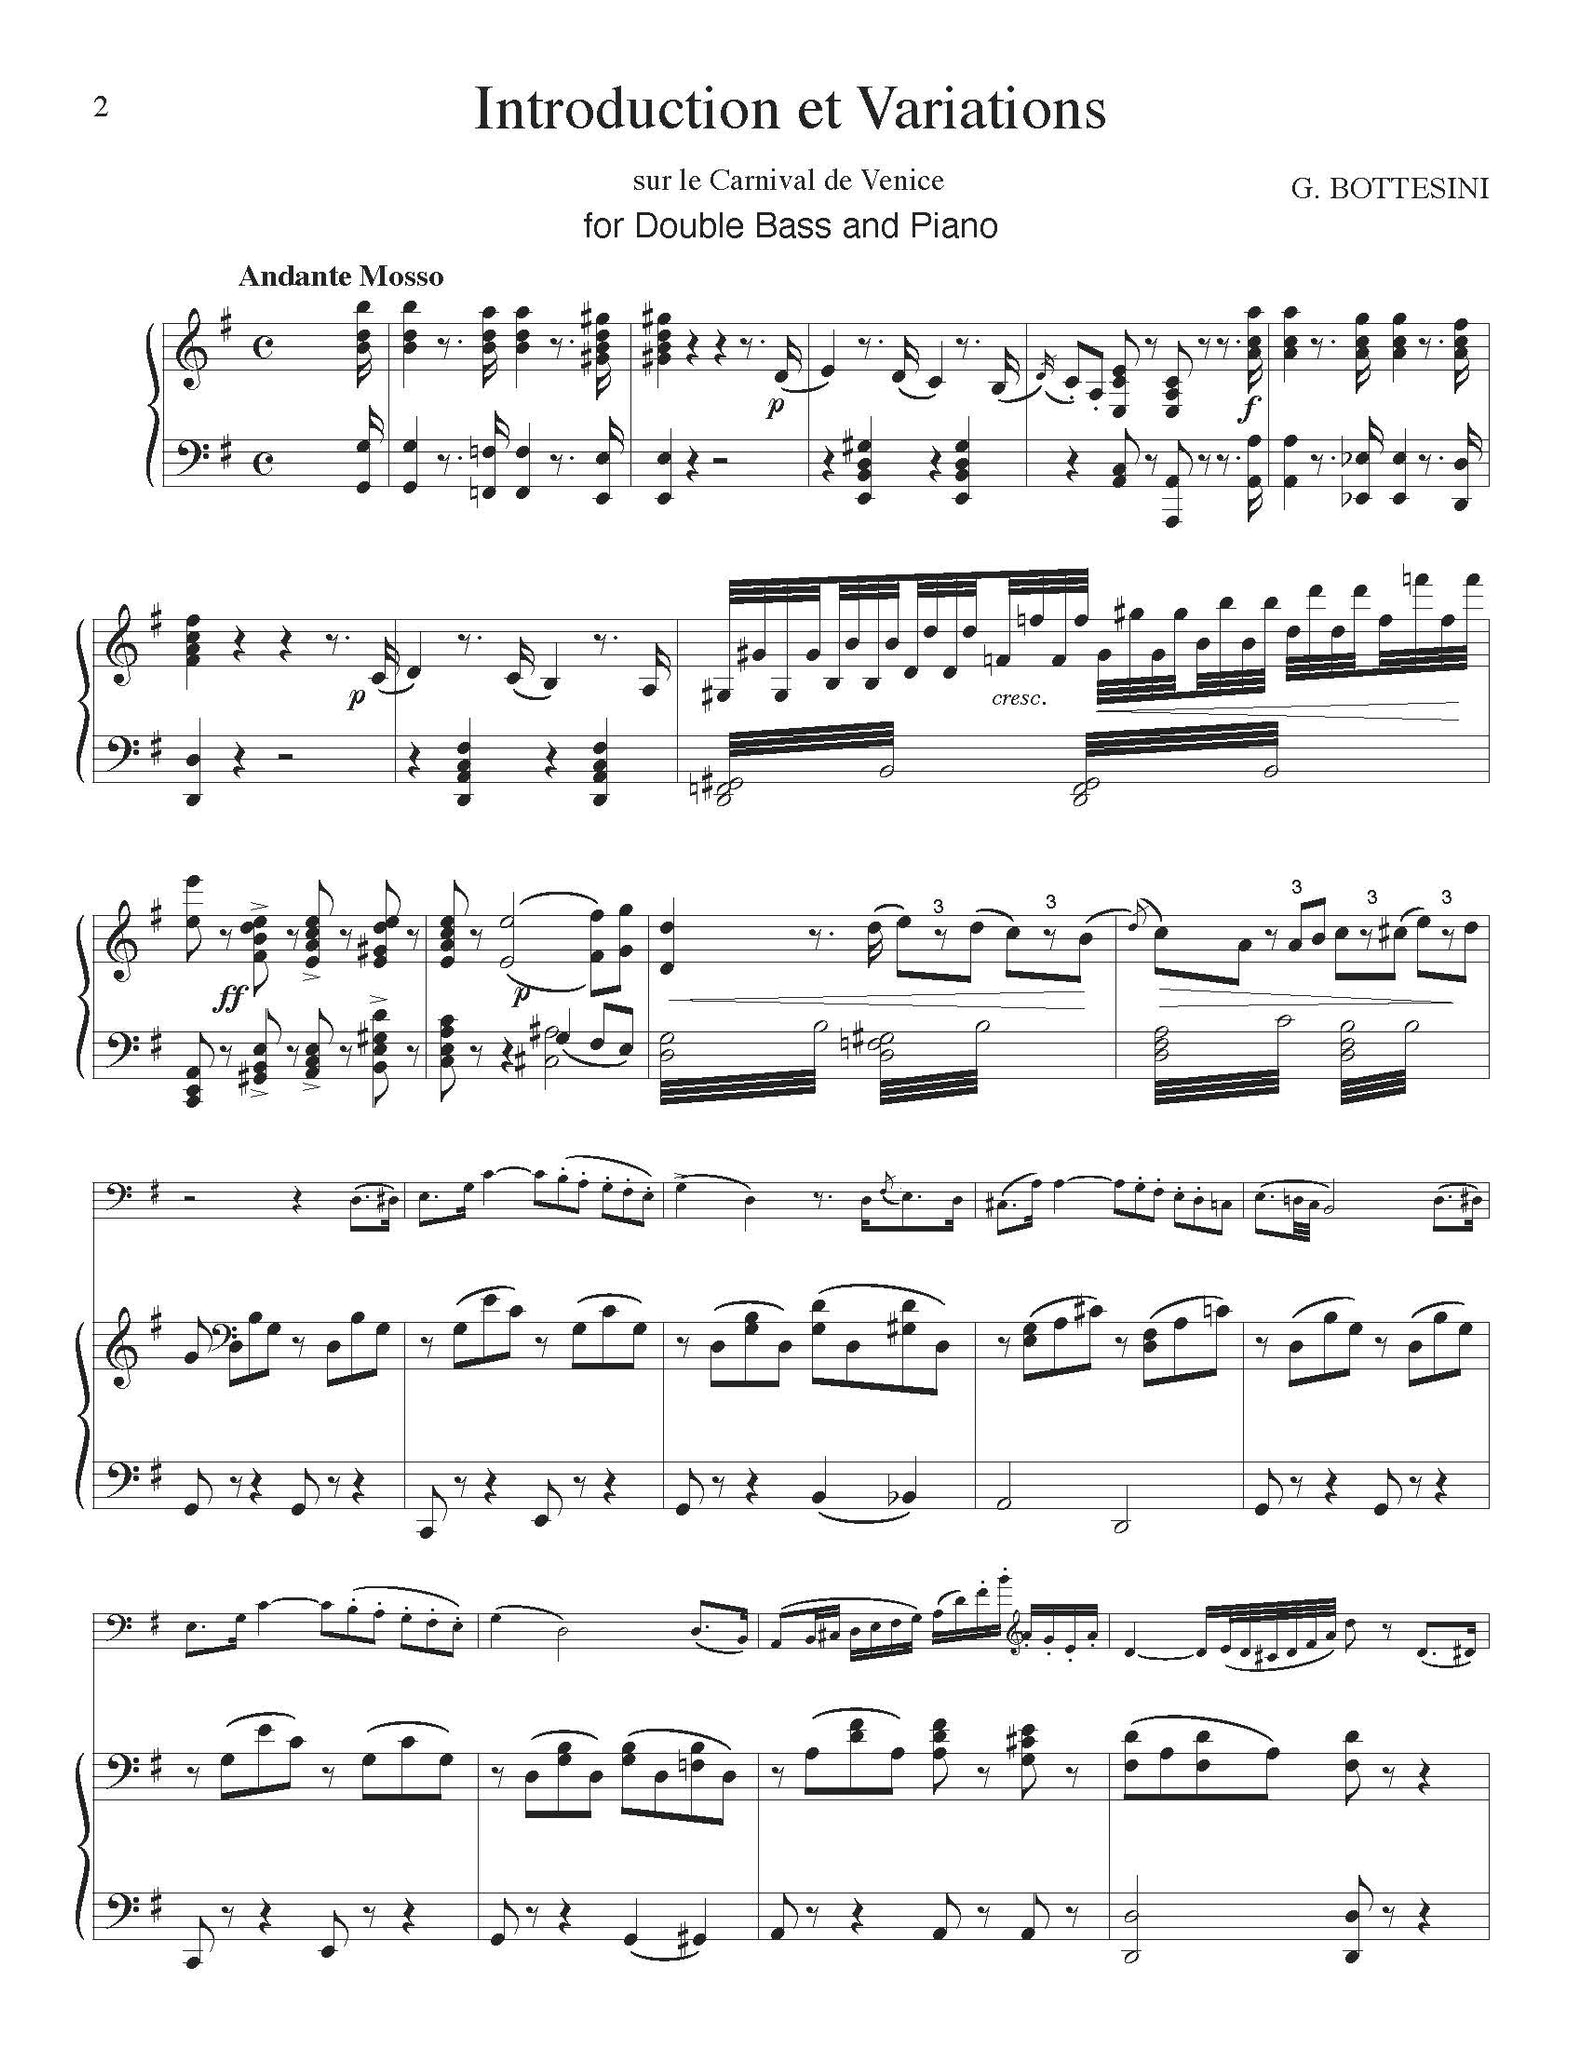 Bottesini Carnival of Venice orchestra tuning page 1